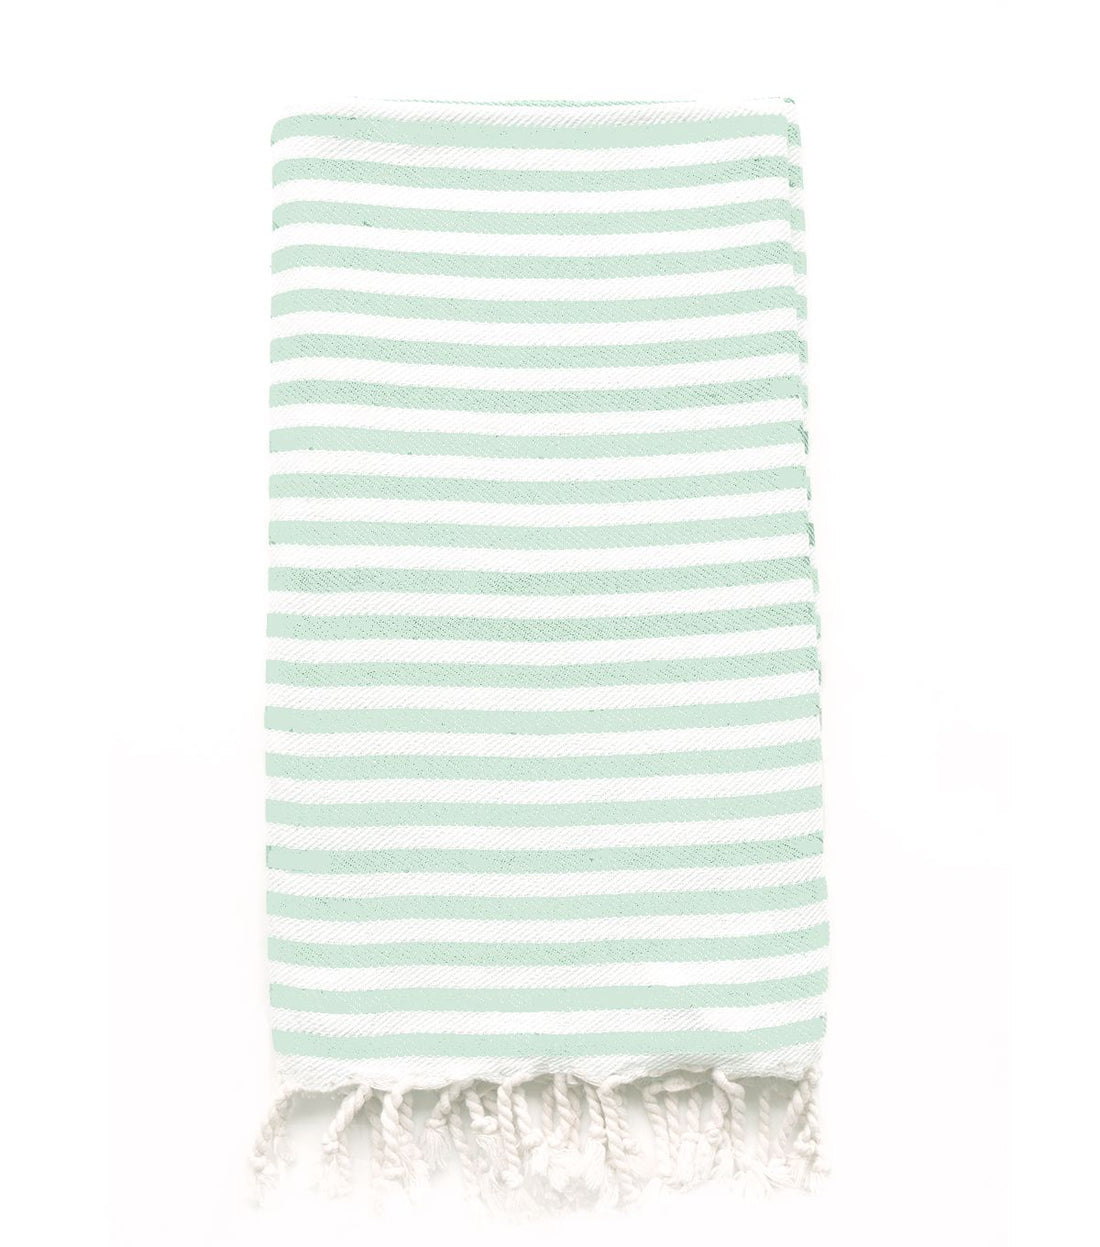 Authentic Turkish Towel, Beach Candy Towel